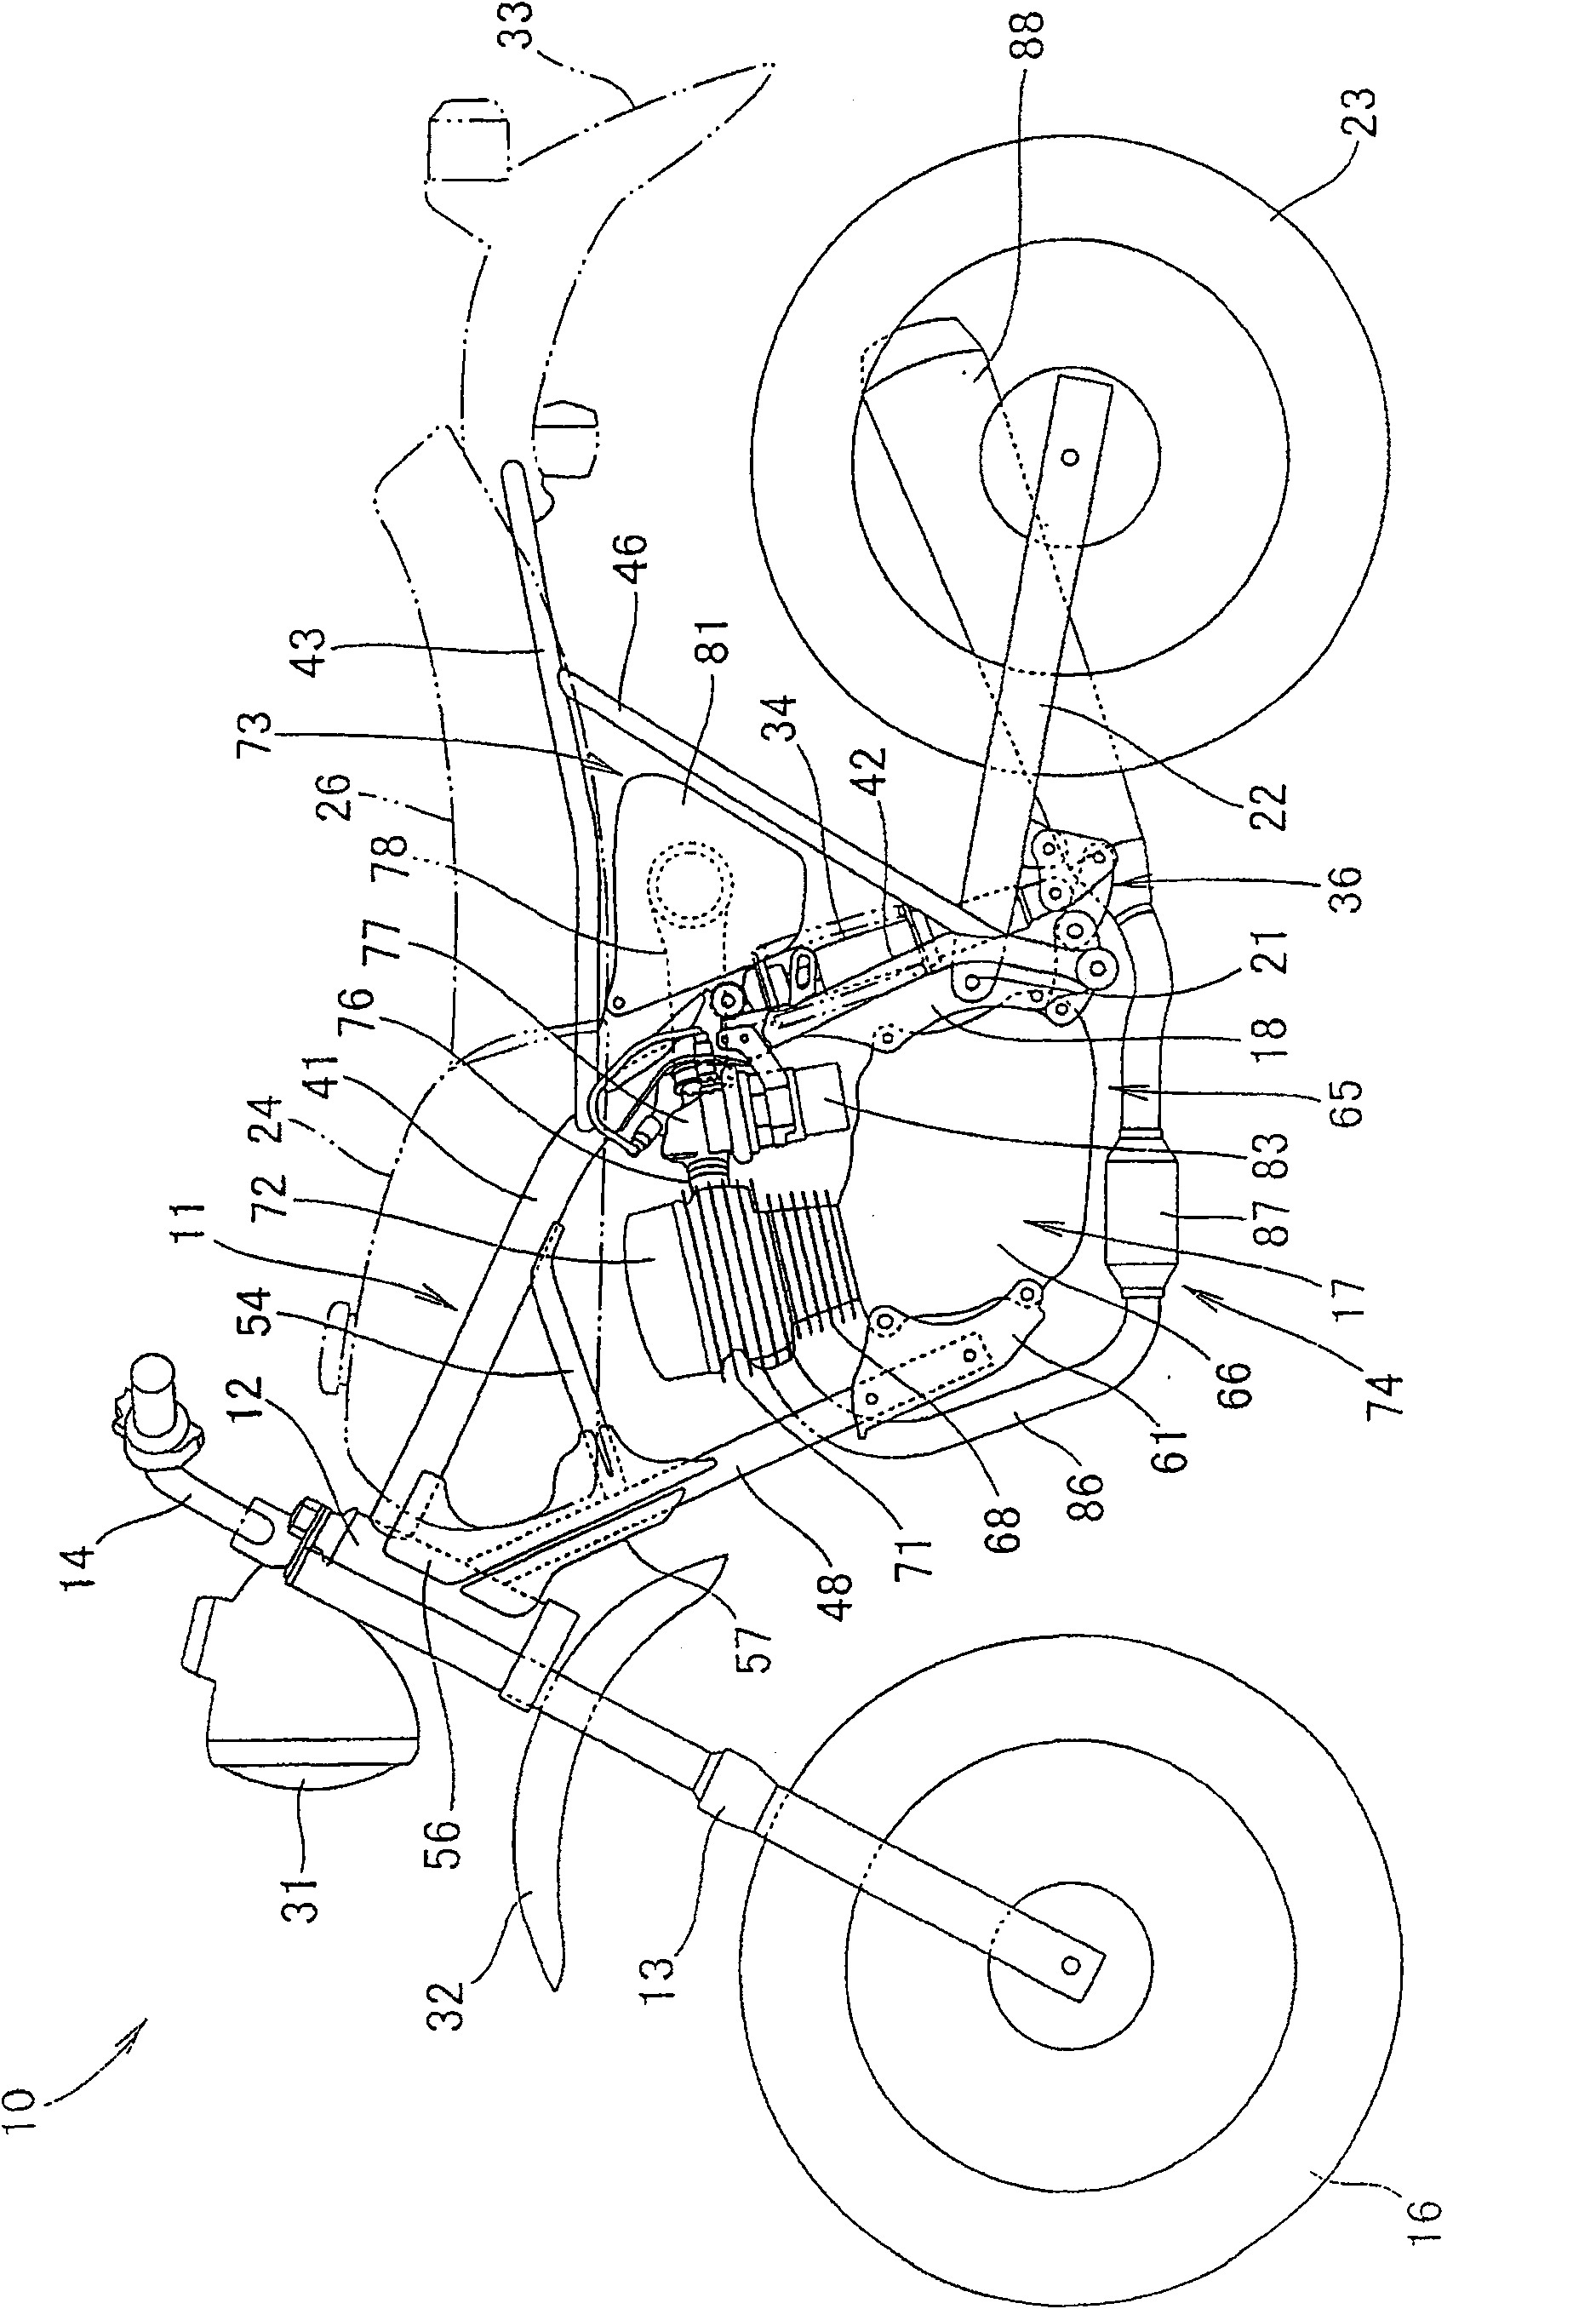 Fuel pump configuring structure of vehicle